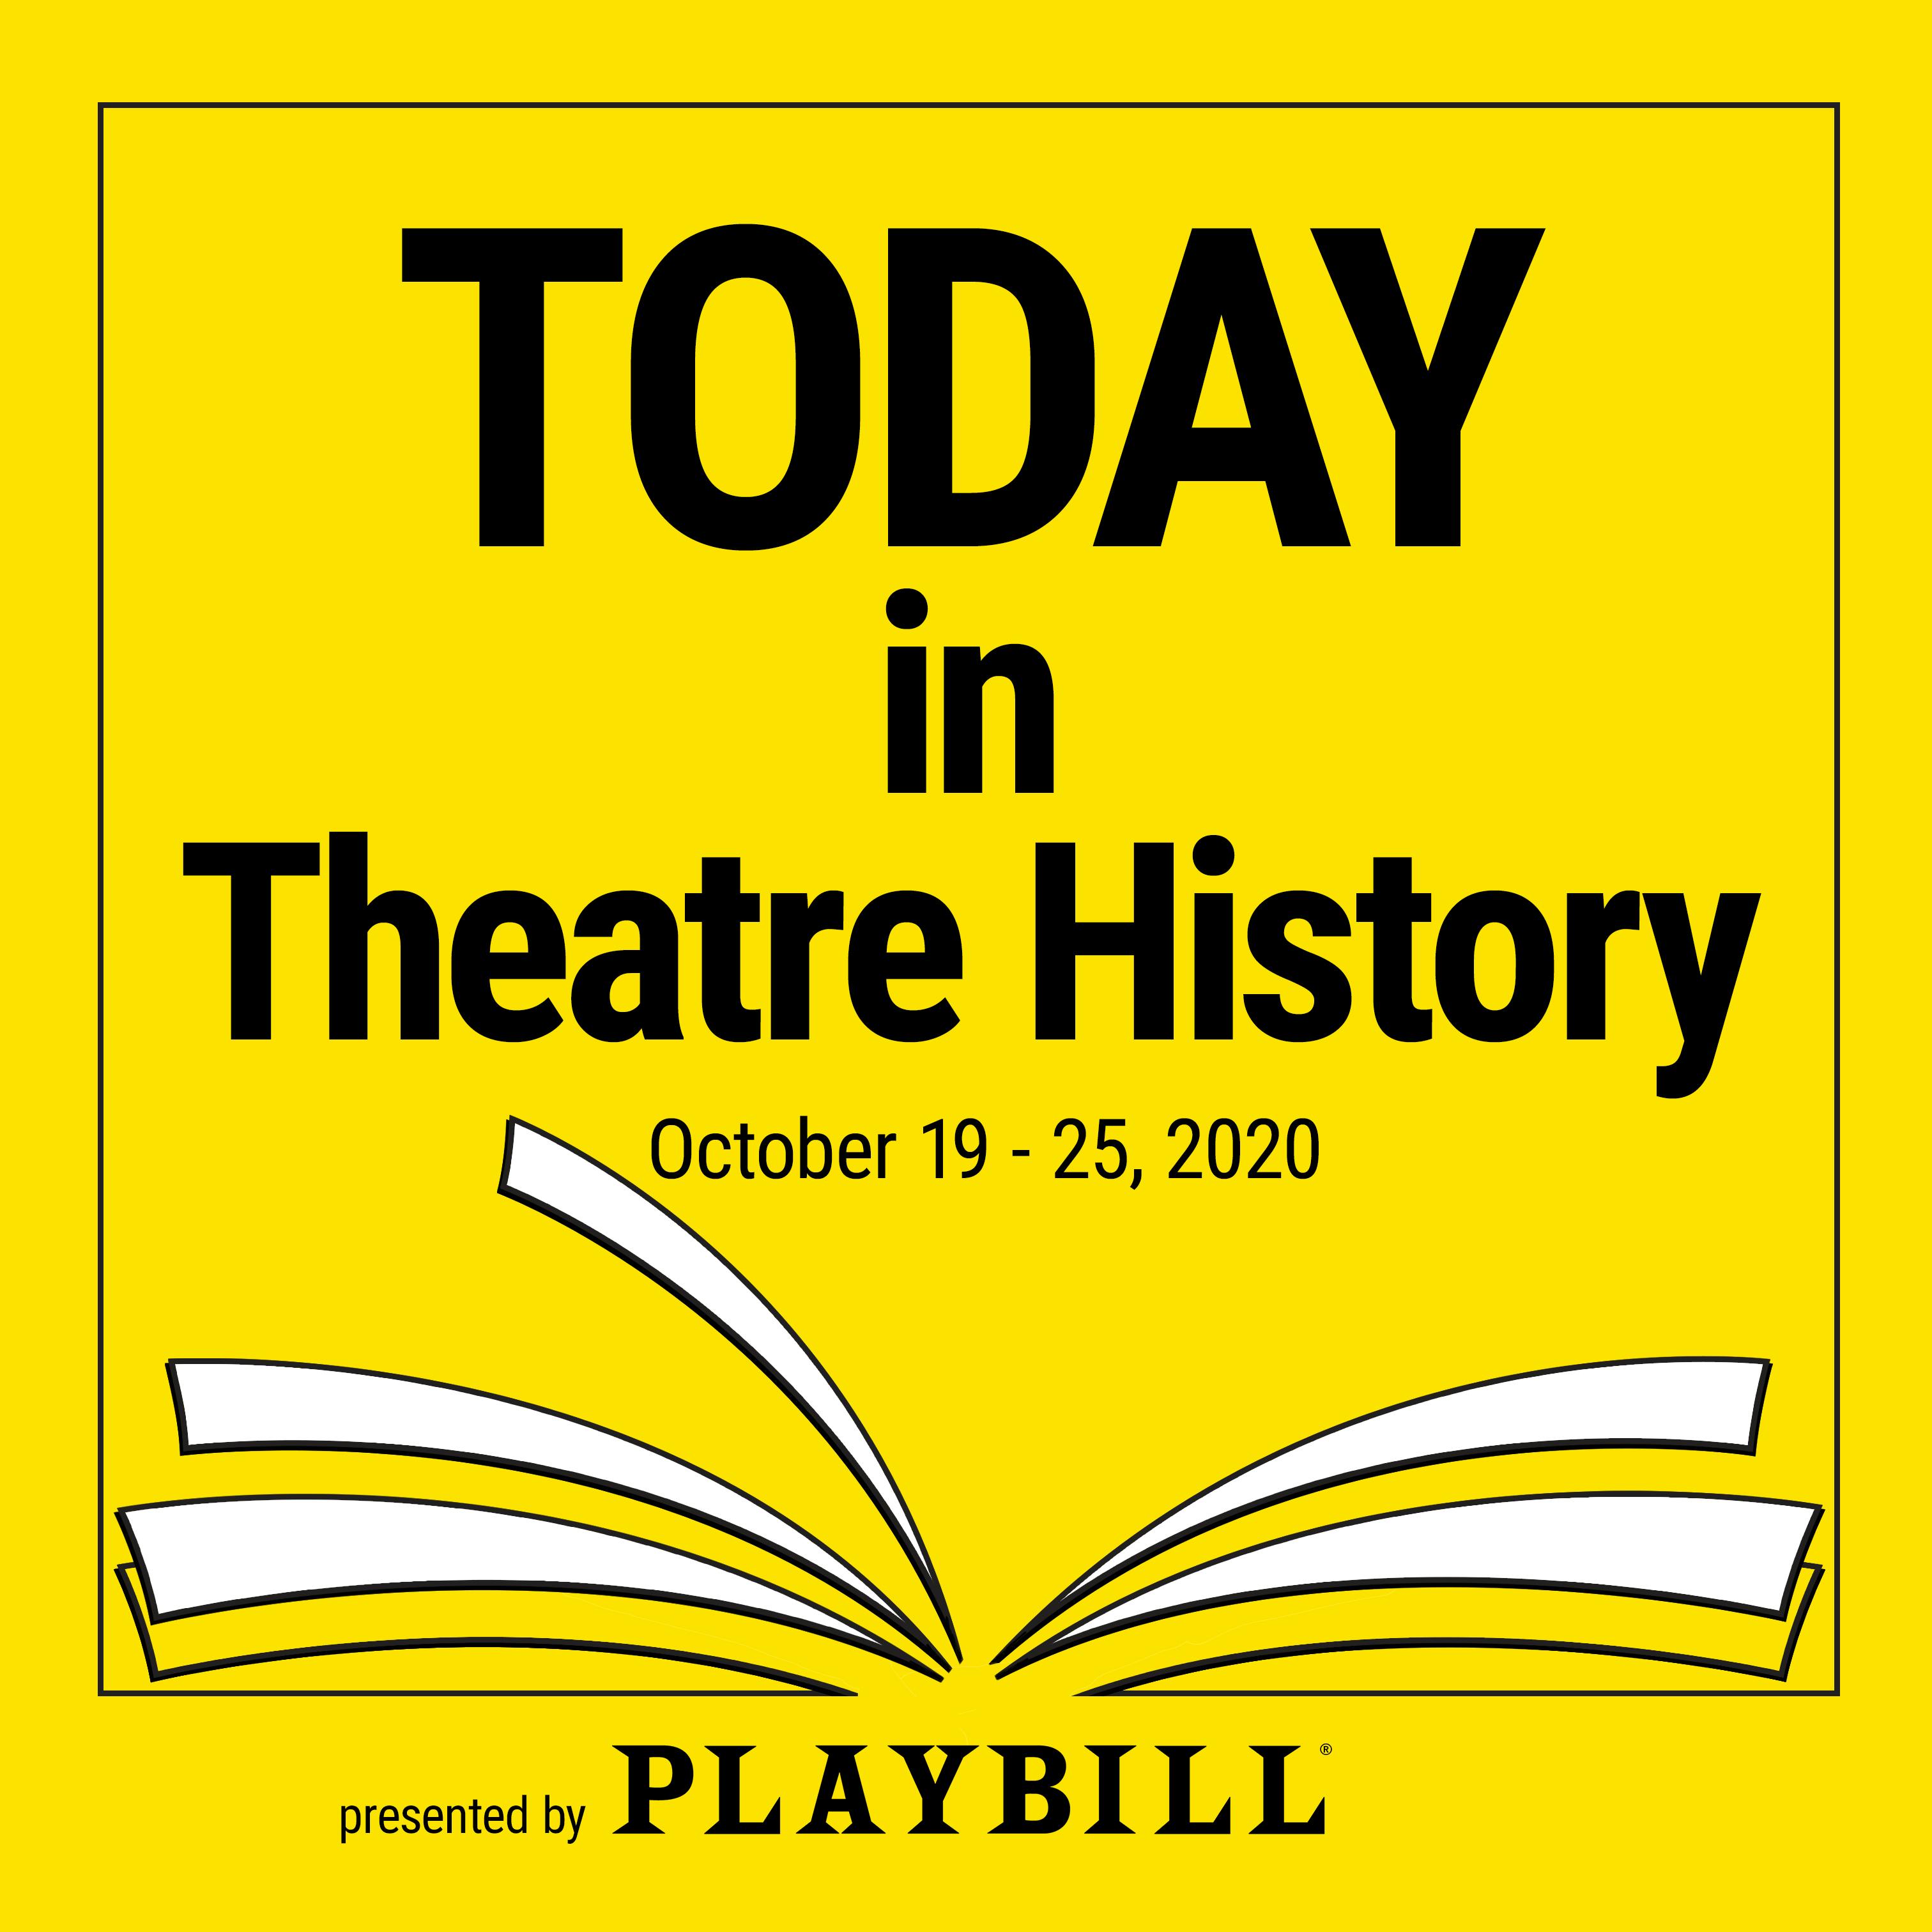 October 19–25, 2020: Julie Andrews returns to Broadway in Victor/Victoria, Patti LuPone returns to Broadway in Anything Goes, and Pippin and A Chorus Line both premiere on Broadway, and more in this